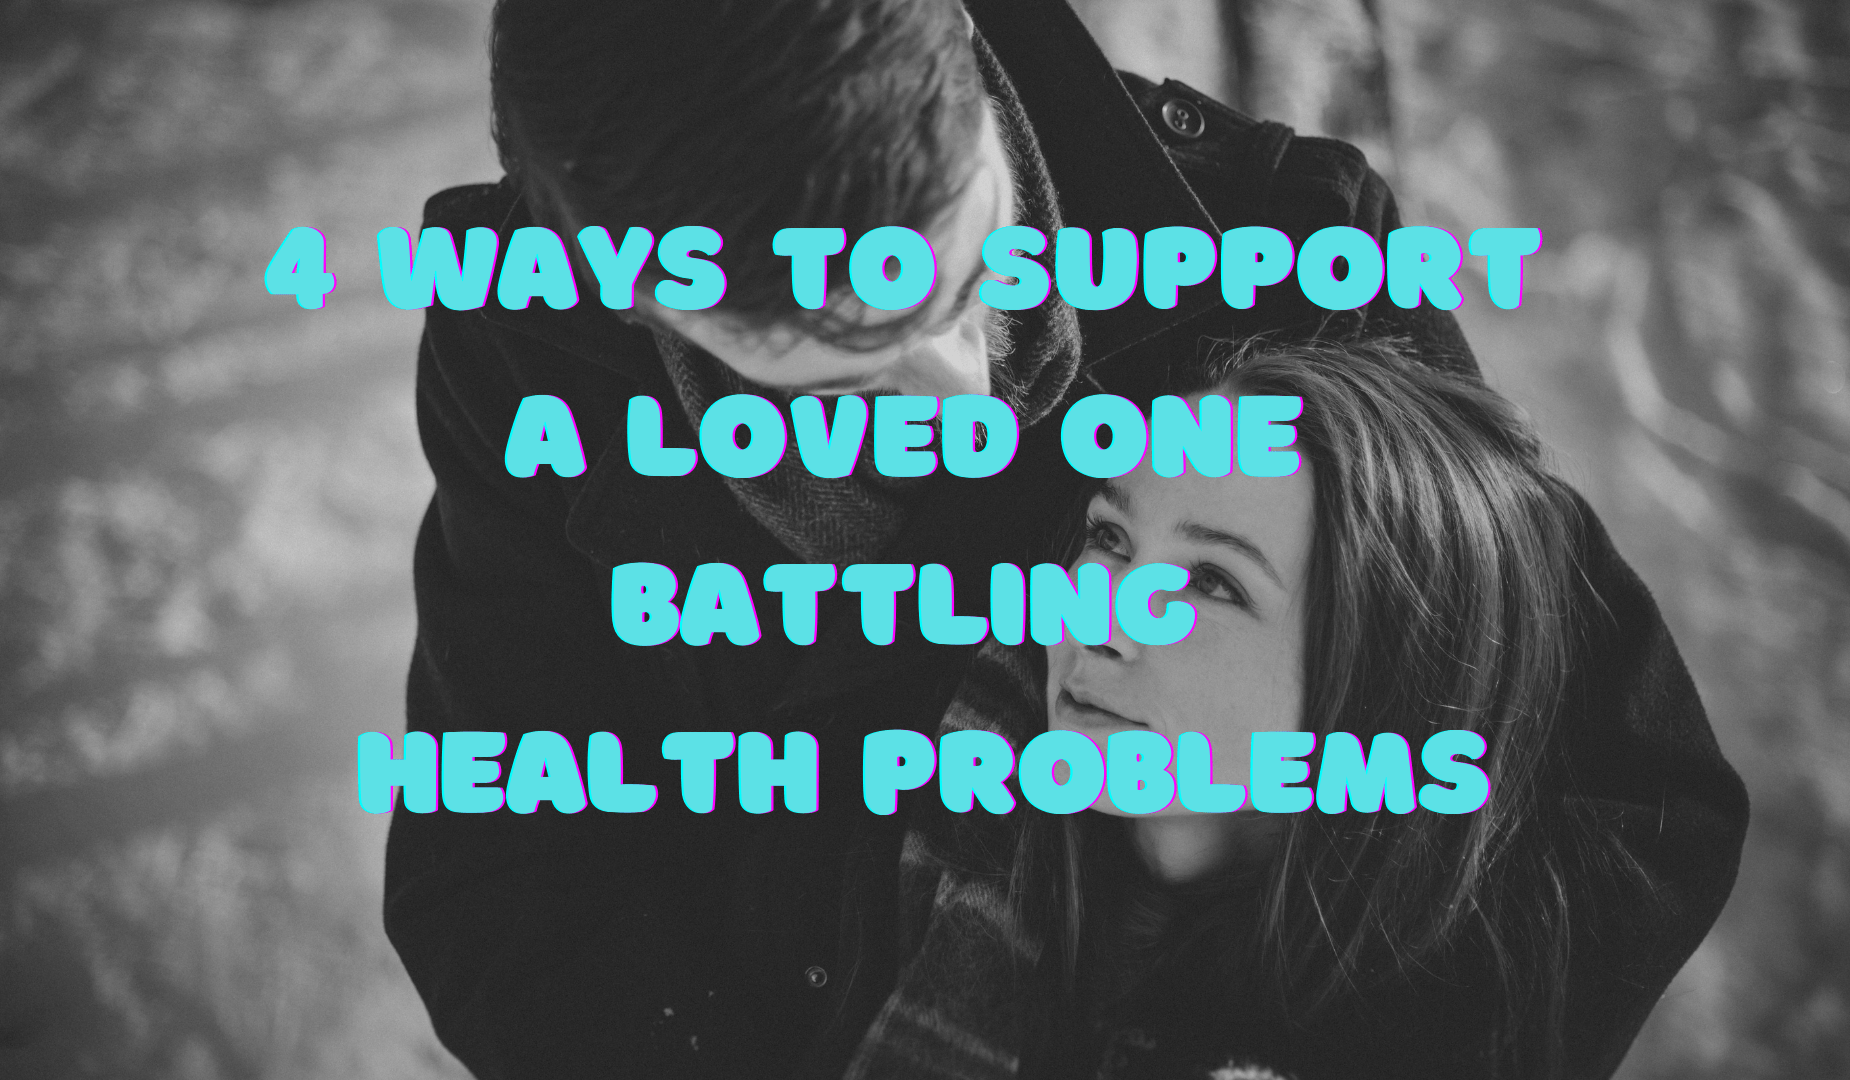 4 Ways To Support A Loved One Battling Health Problems